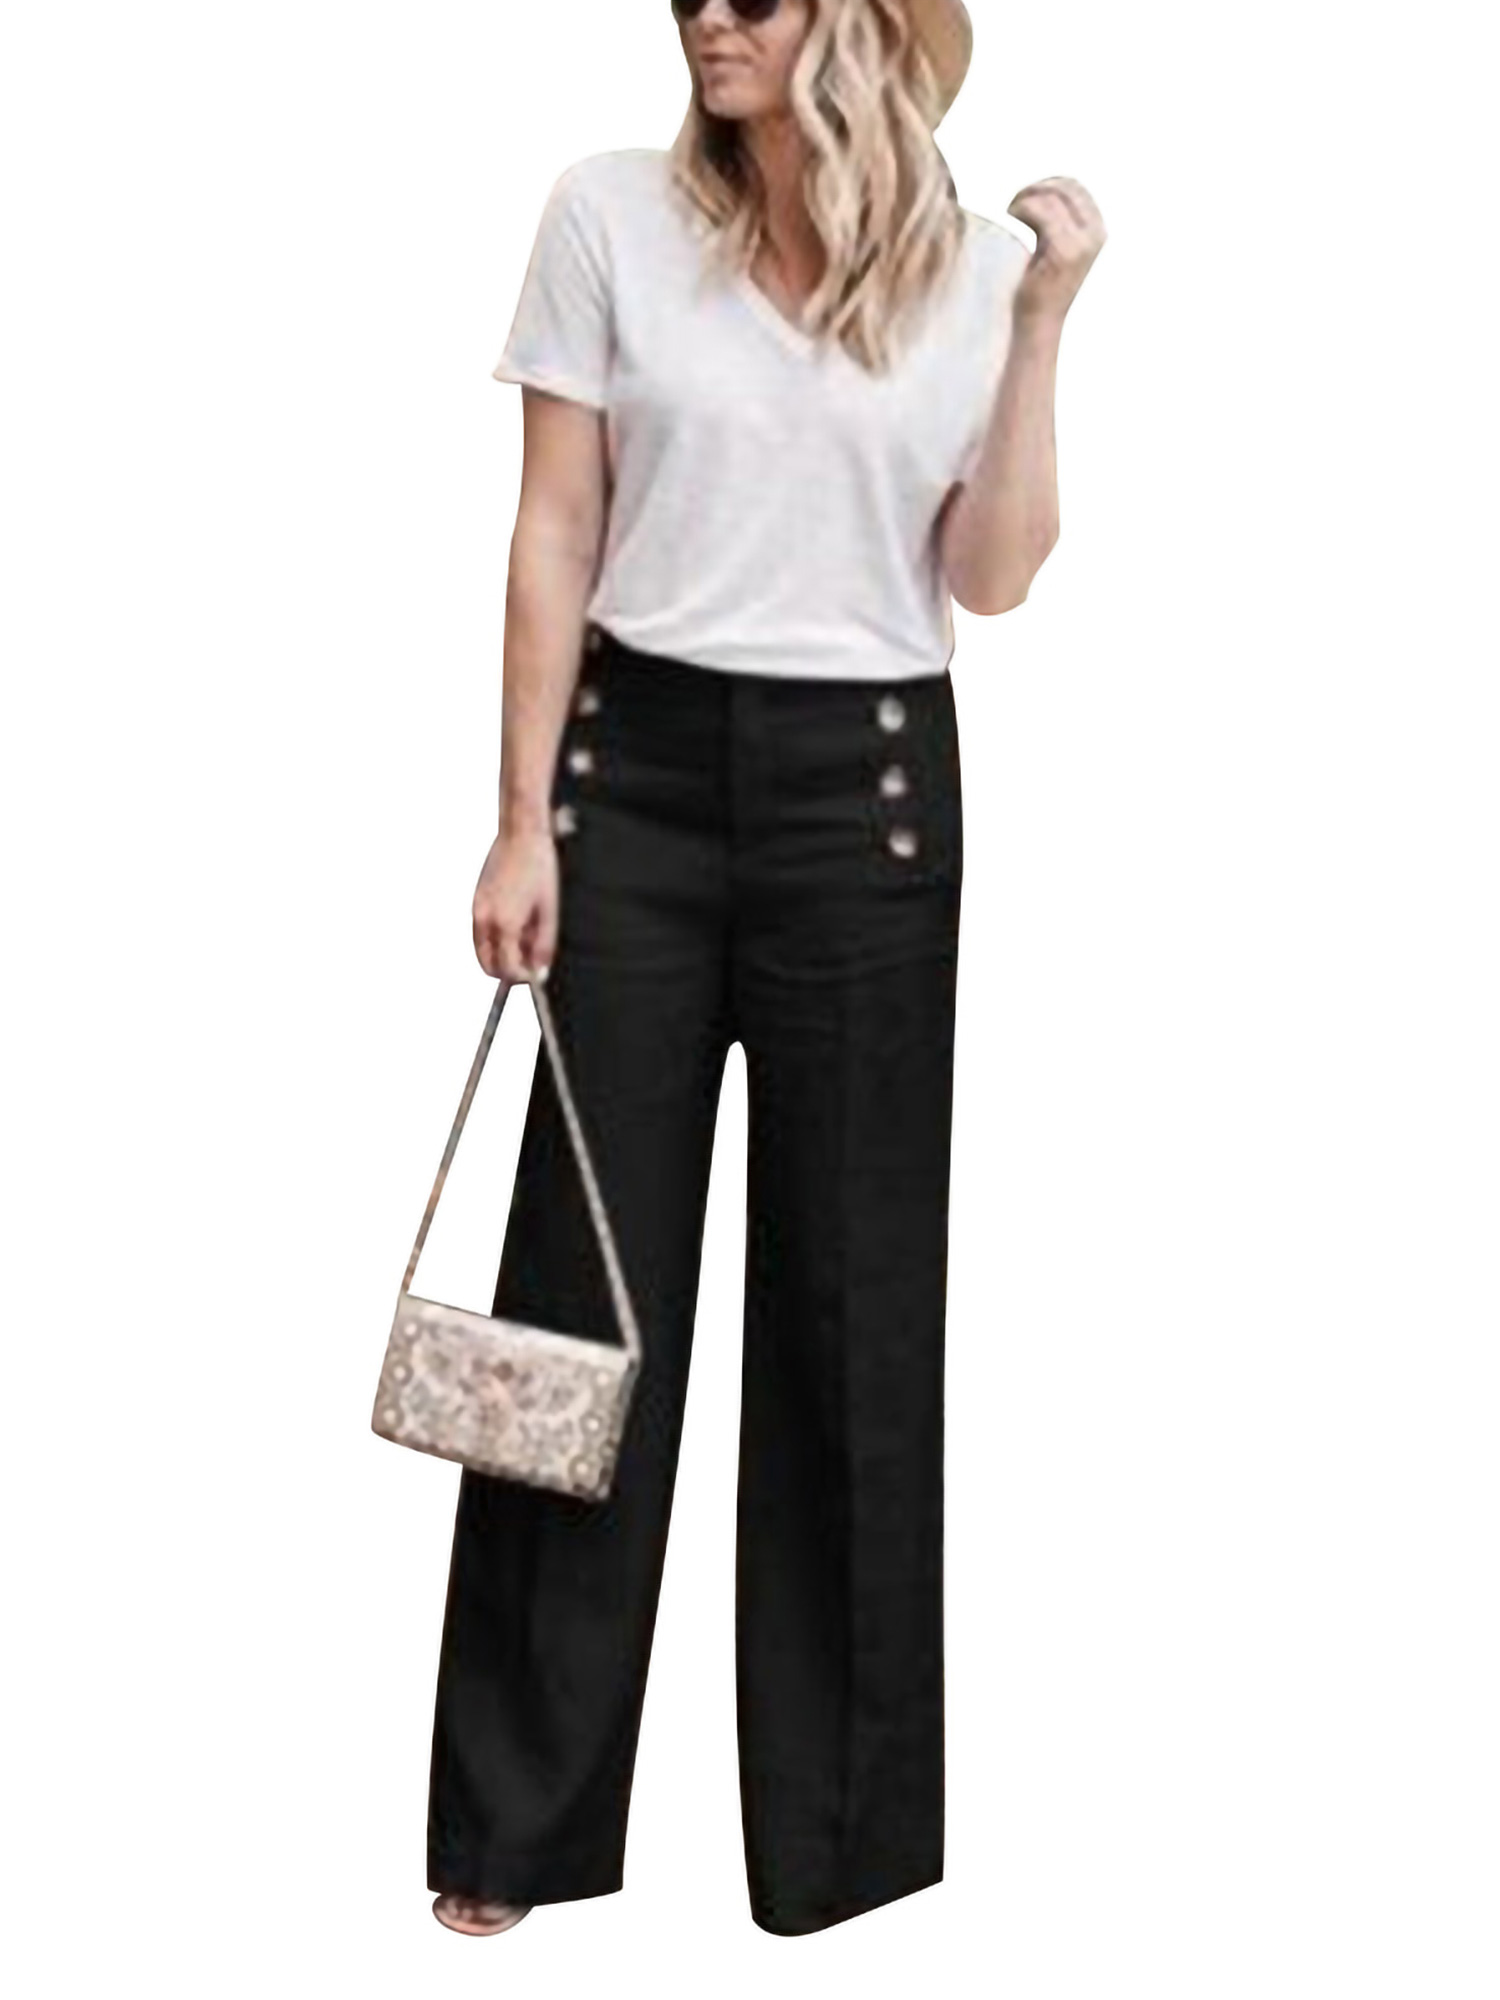 HIMONE Women Casual Solid Button Palazzo Pants Loose Wide Leg Pants Trousers High Waist Flare Pants OL Business Pants - image 1 of 4